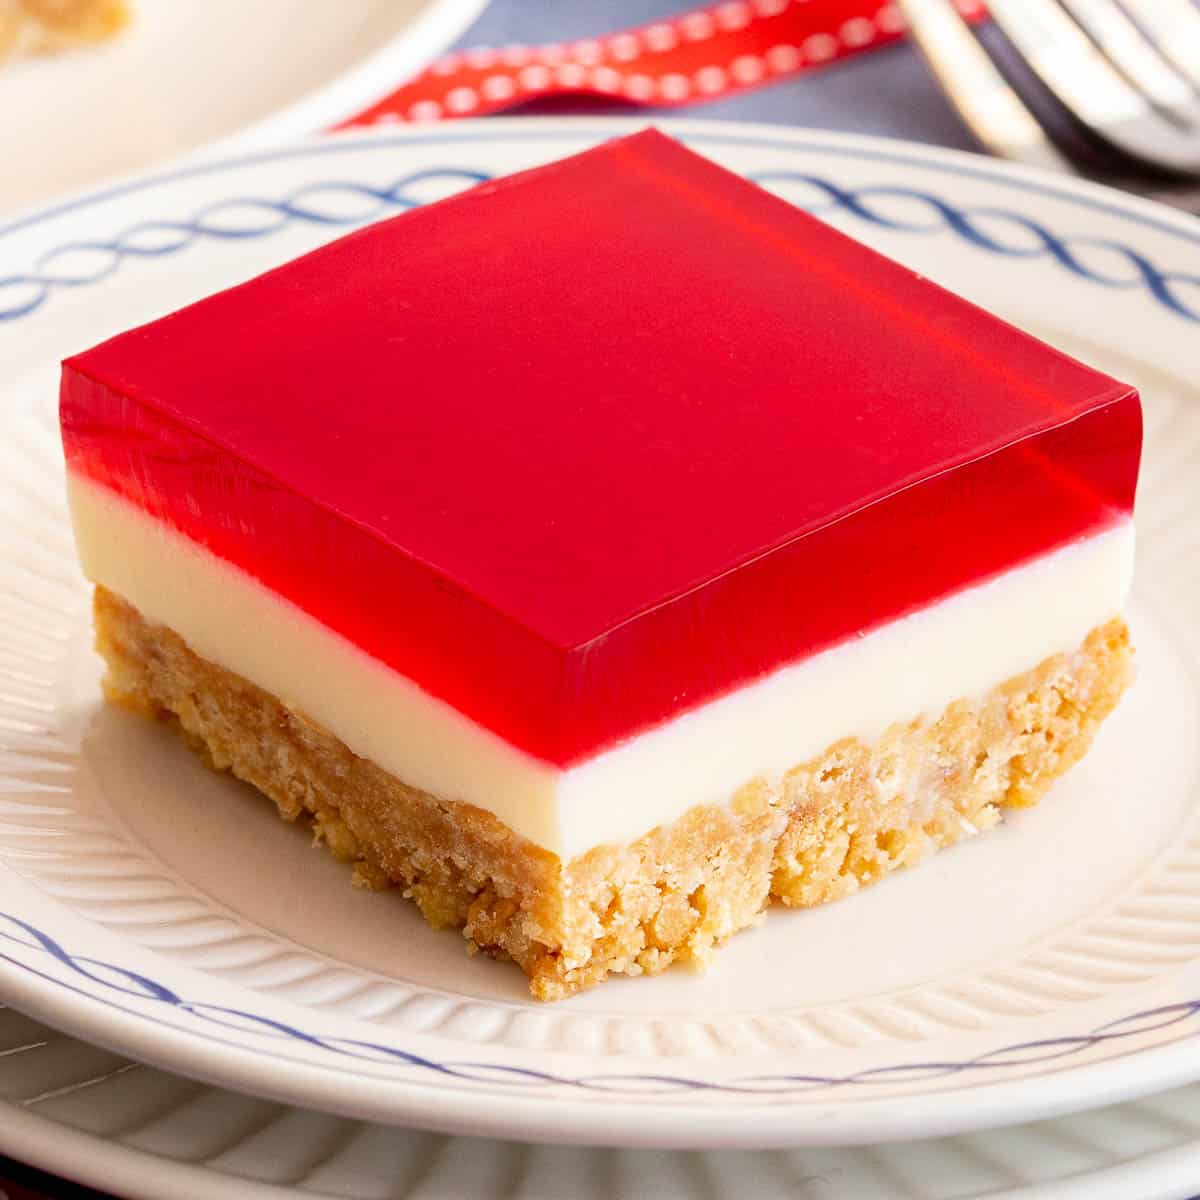 Square piece of jelly slice on a small plate.